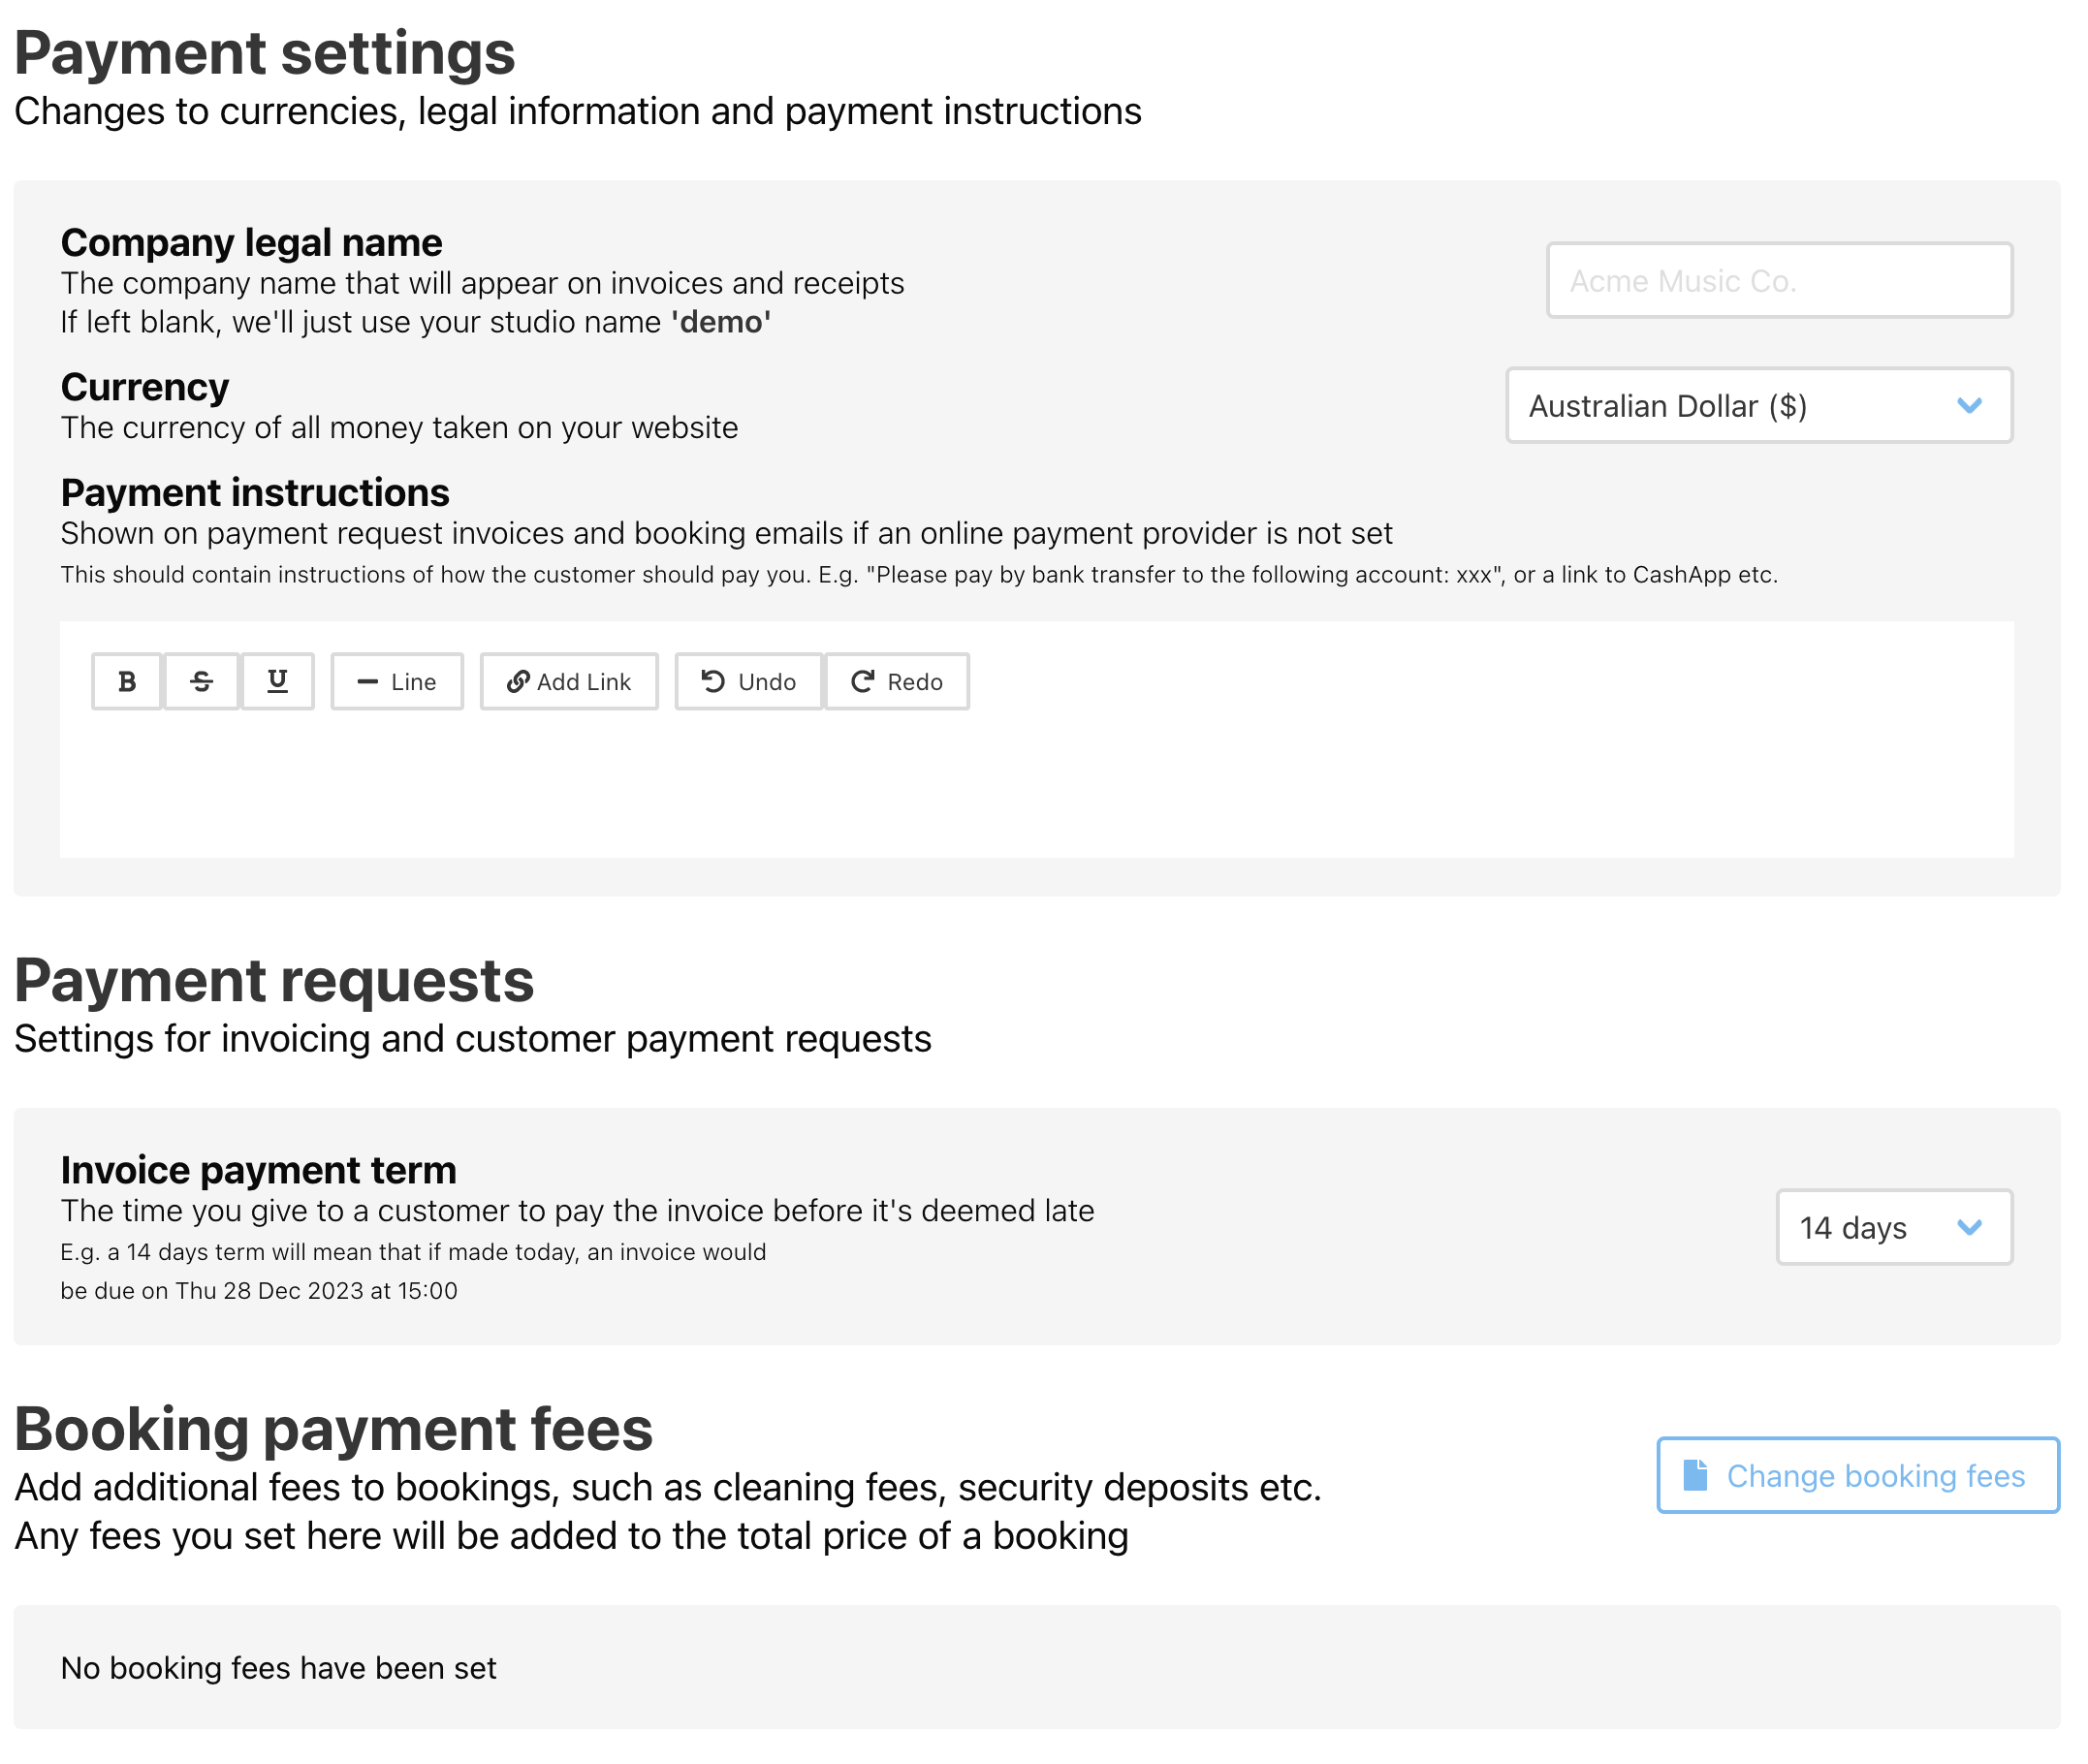 Jammed payments are flexible - there are multiple ways to setup Jammed to match how your studio operates